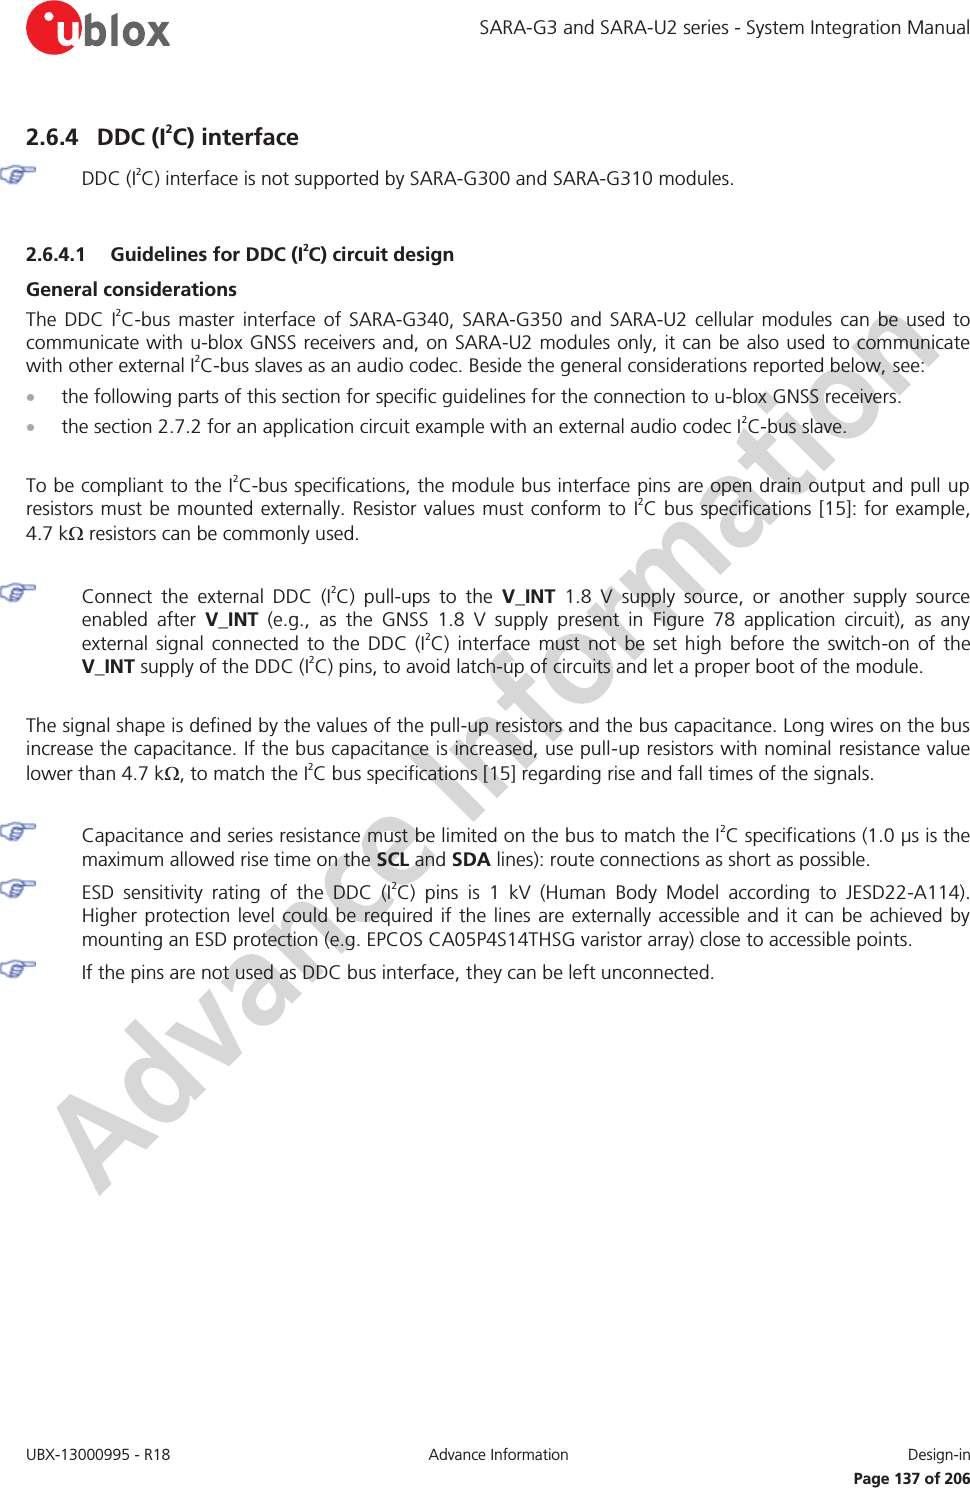 SARA-G3 and SARA-U2 series - System Integration Manual UBX-13000995 - R18  Advance Information  Design-in   Page 137 of 206 2.6.4 DDC (I2C) interface  DDC (I2C) interface is not supported by SARA-G300 and SARA-G310 modules.  2.6.4.1 Guidelines for DDC (I2C) circuit design General considerations The DDC I2C-bus master interface of SARA-G340, SARA-G350 and SARA-U2 cellular modules can be used to communicate with u-blox GNSS receivers and, on SARA-U2 modules only, it can be also used to communicate with other external I2C-bus slaves as an audio codec. Beside the general considerations reported below, see: x the following parts of this section for specific guidelines for the connection to u-blox GNSS receivers. x the section 2.7.2 for an application circuit example with an external audio codec I2C-bus slave.  To be compliant to the I2C-bus specifications, the module bus interface pins are open drain output and pull up resistors must be mounted externally. Resistor values must conform to I2C bus specifications [15]: for example, 4.7 k: resistors can be commonly used.    Connect the external DDC (I2C) pull-ups to the V_INT 1.8 V supply source, or another supply source enabled after V_INT (e.g., as the GNSS 1.8 V supply present in Figure 78 application circuit), as any external signal connected to the DDC (I2C) interface must not be set high before the switch-on of the V_INT supply of the DDC (I2C) pins, to avoid latch-up of circuits and let a proper boot of the module.  The signal shape is defined by the values of the pull-up resistors and the bus capacitance. Long wires on the bus increase the capacitance. If the bus capacitance is increased, use pull-up resistors with nominal resistance value lower than 4.7 k:, to match the I2C bus specifications [15] regarding rise and fall times of the signals.   Capacitance and series resistance must be limited on the bus to match the I2C specifications (1.0 μs is the maximum allowed rise time on the SCL and SDA lines): route connections as short as possible.  ESD sensitivity rating of the DDC (I2C) pins is 1 kV (Human Body Model according to JESD22-A114). Higher protection level could be required if the lines are externally accessible and it can be achieved by mounting an ESD protection (e.g. EPCOS CA05P4S14THSG varistor array) close to accessible points.  If the pins are not used as DDC bus interface, they can be left unconnected.  